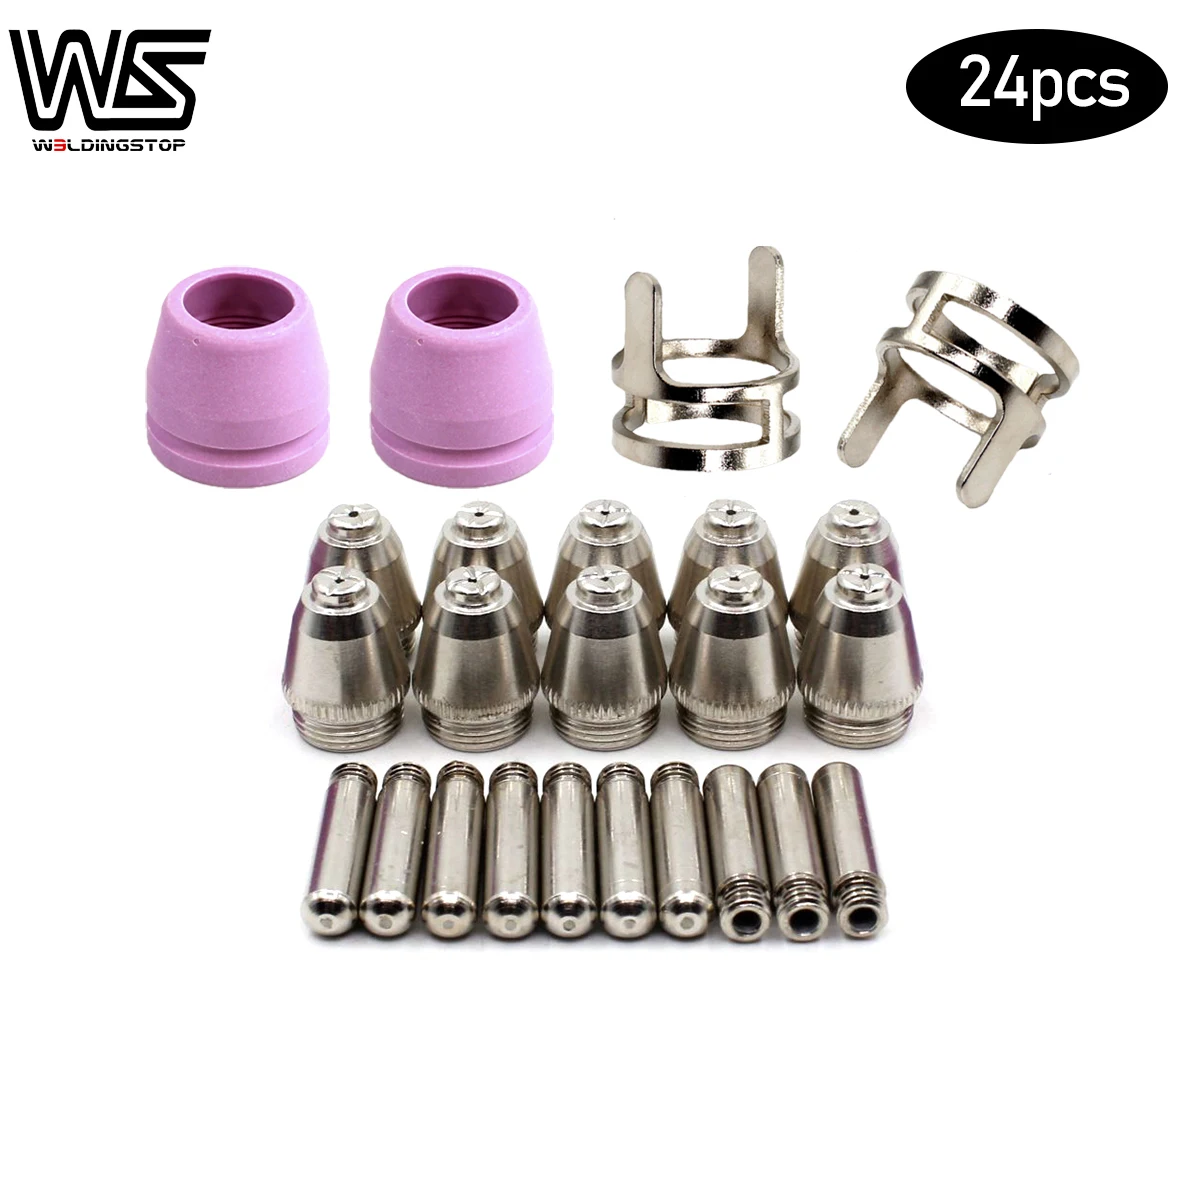 

SG-55 AG-60 Electrode Nozzle for Plasma Cutting Cutter Torch Consumables WSD60 WSD60P SG55 AG60 PKG/24